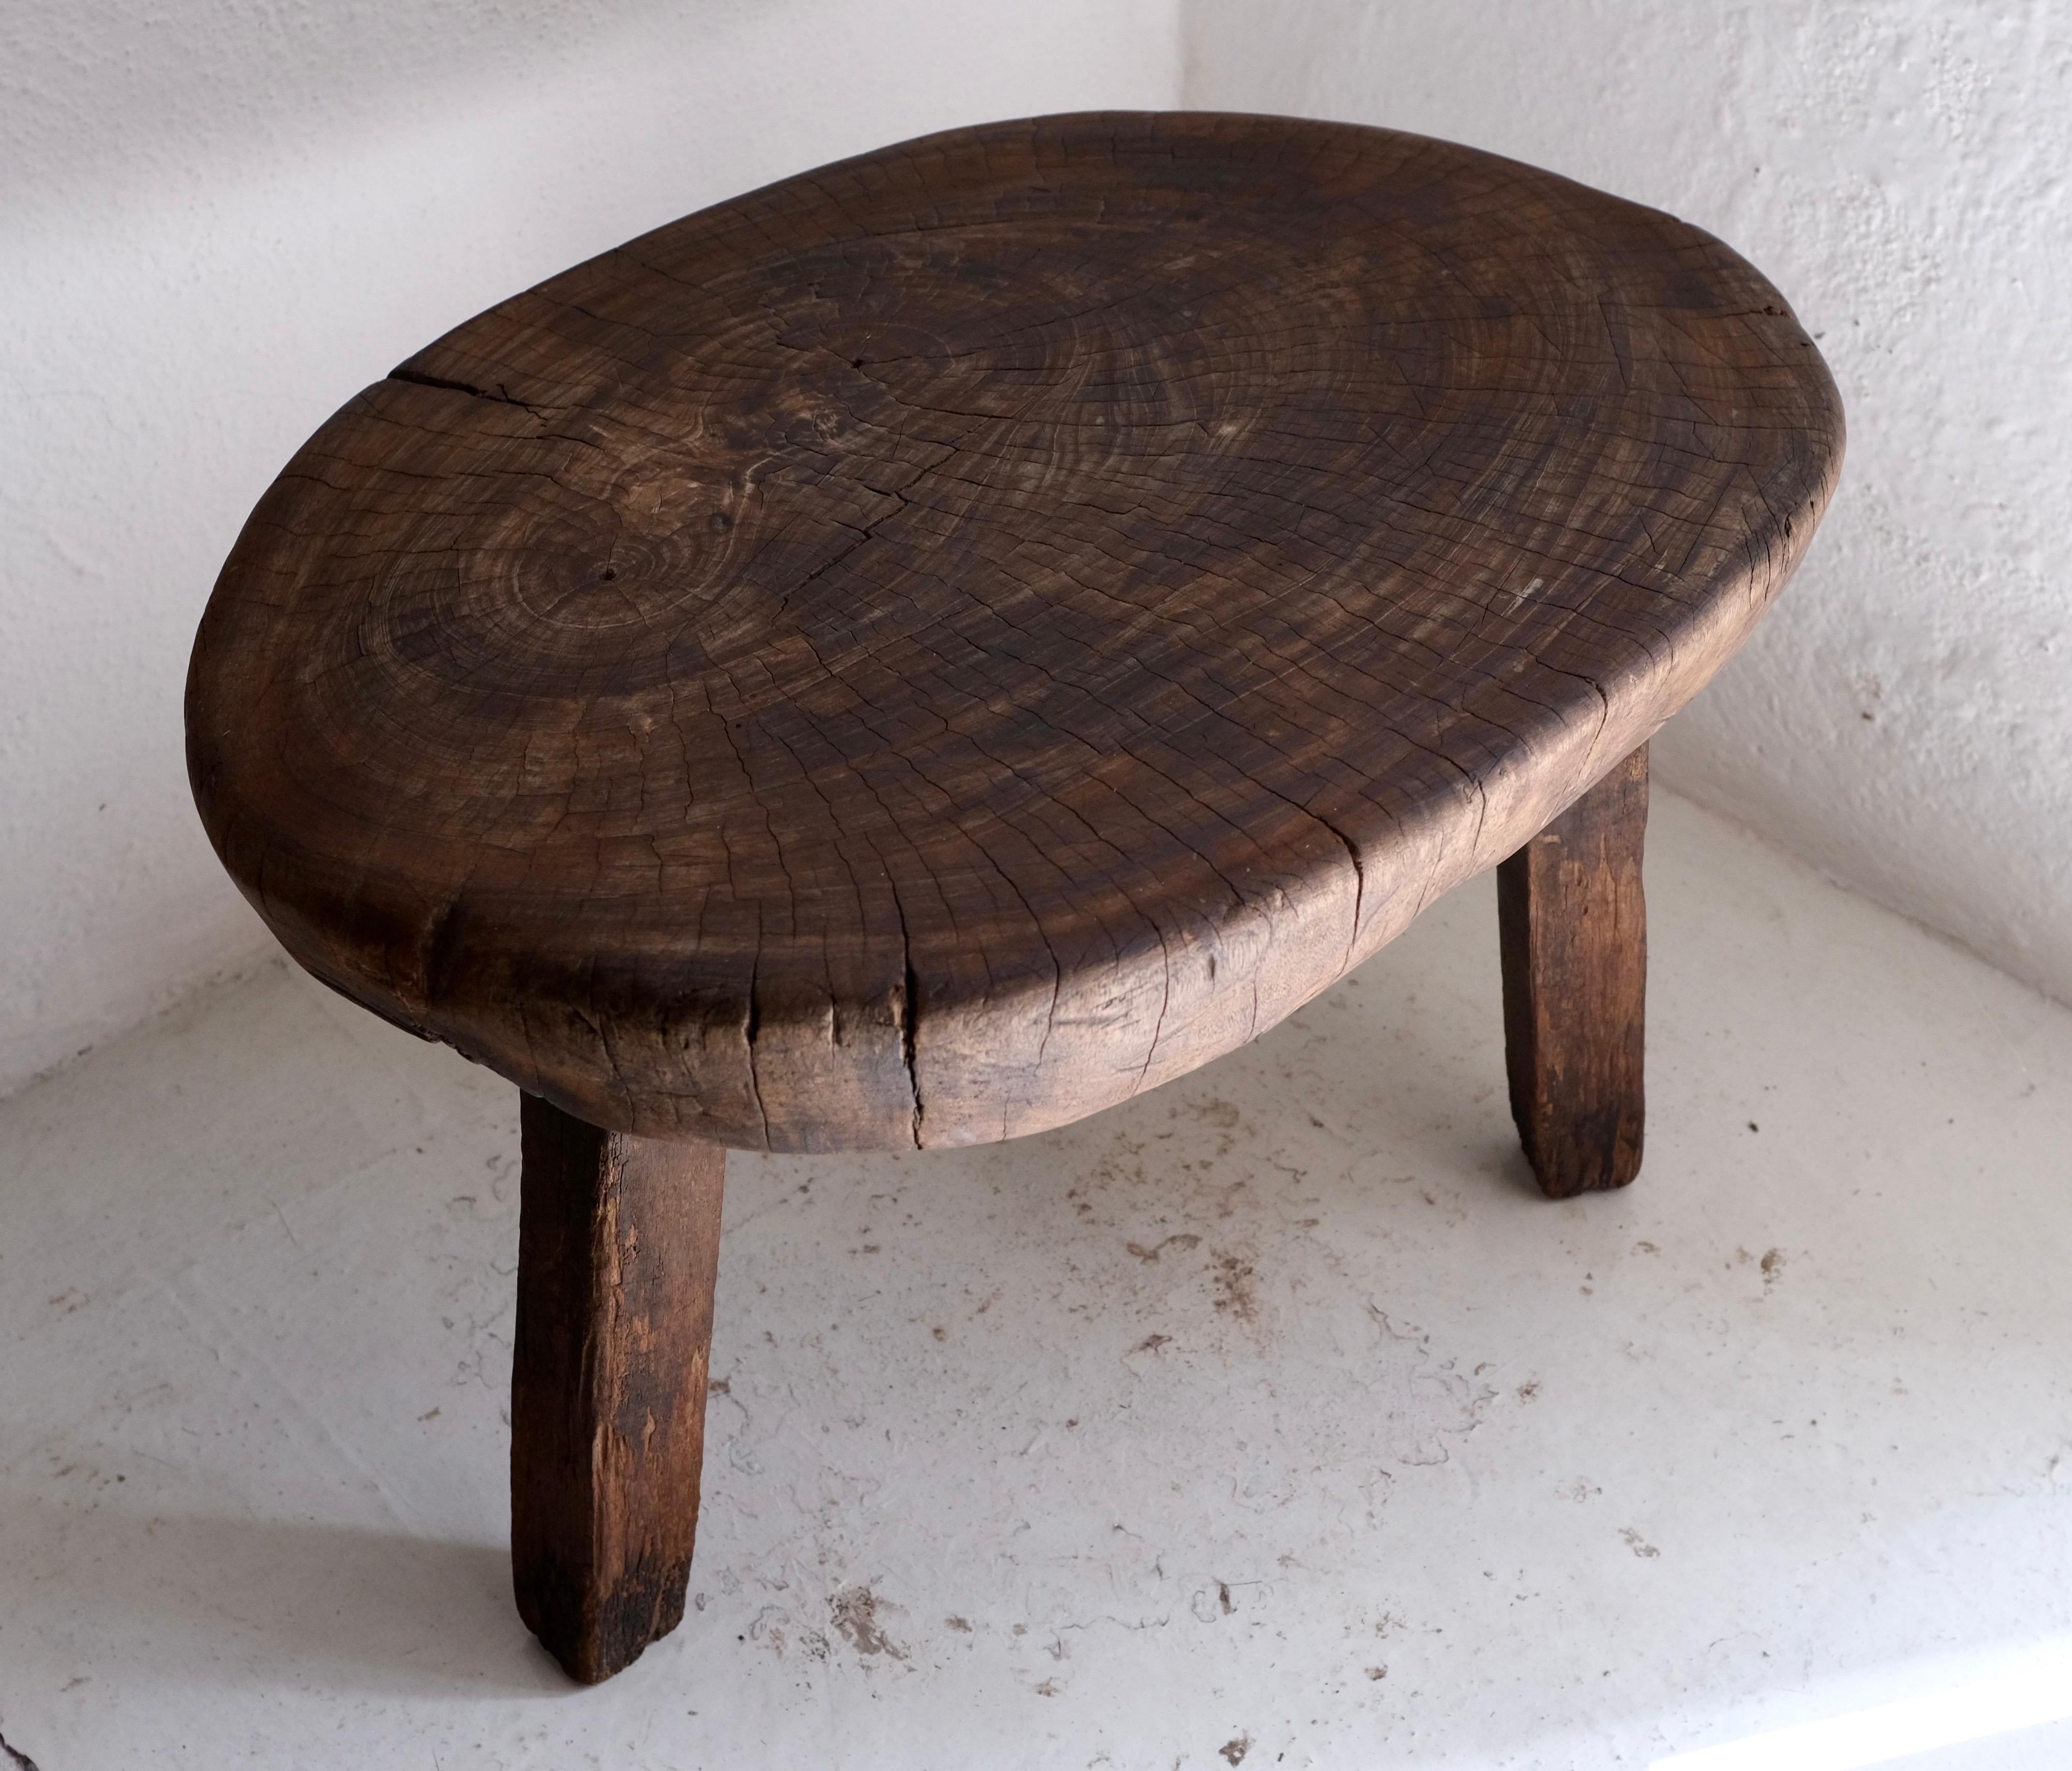 Rustic side table from the Yucatan Peninsula, circa 1970's. Sourced in the southern area of Yucatan, these tables are solid and extremely sturdy. The three legs have been secured and stabilized. The table top is an end cut piece which is somewhat